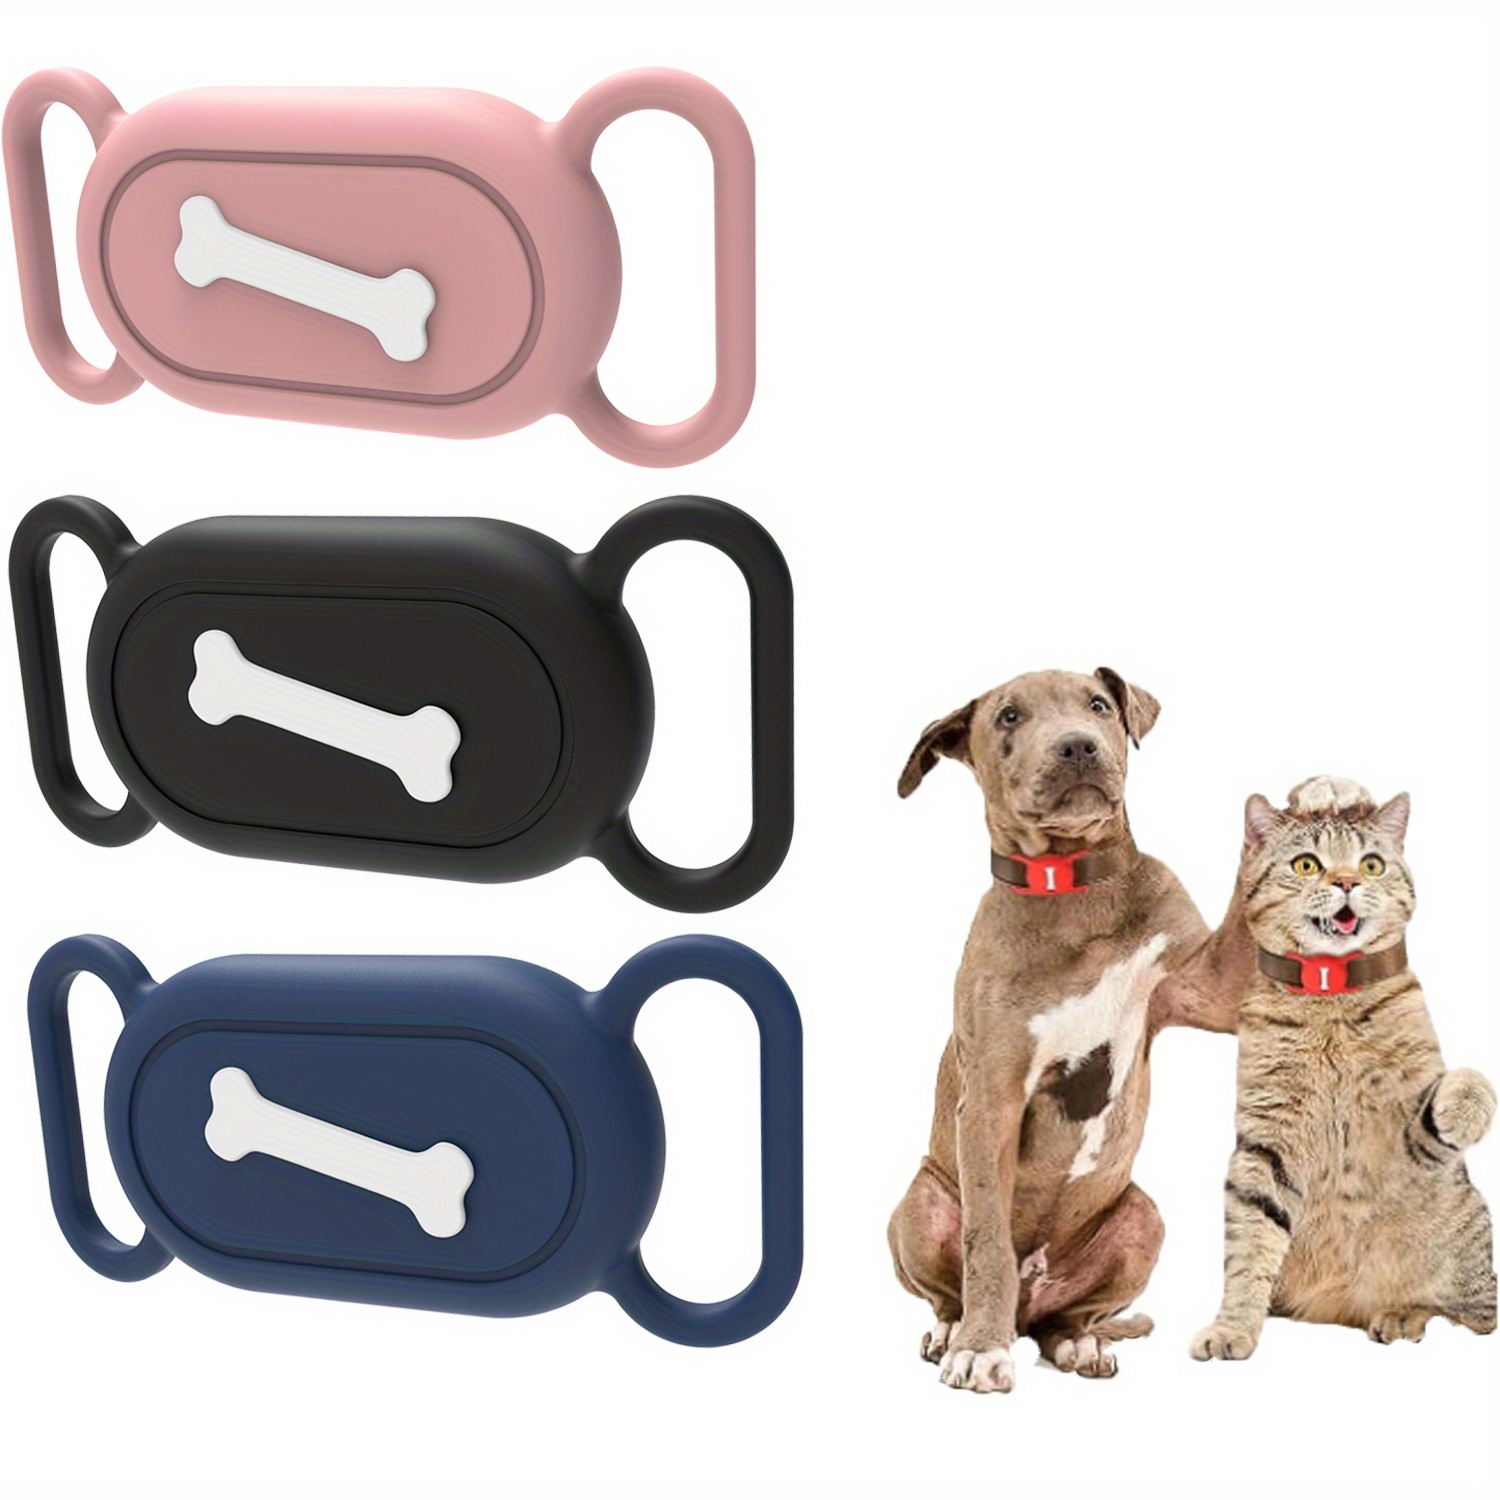 2PCS) Ipx8 Waterproof Airtag Dog Collar Holder, Durable Hard Anti-scratch  Protective Airtag Case For Apple Airtag on OnBuy